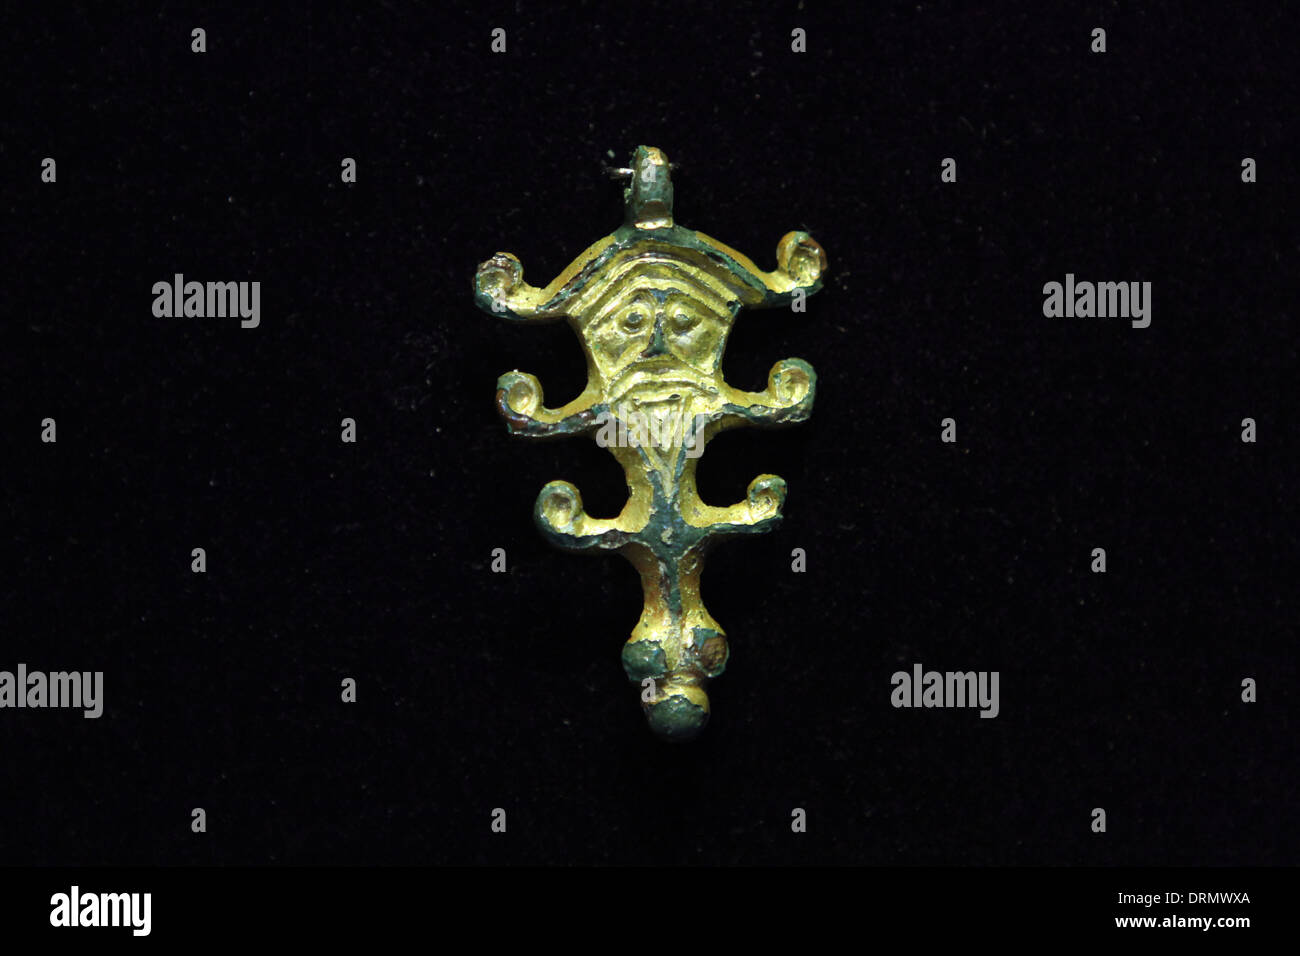 Great Moravian Empire. Gilt bronze pendant with a human face and horns, symbol of Slavic pagan god Veles, from the 8th century. Stock Photo